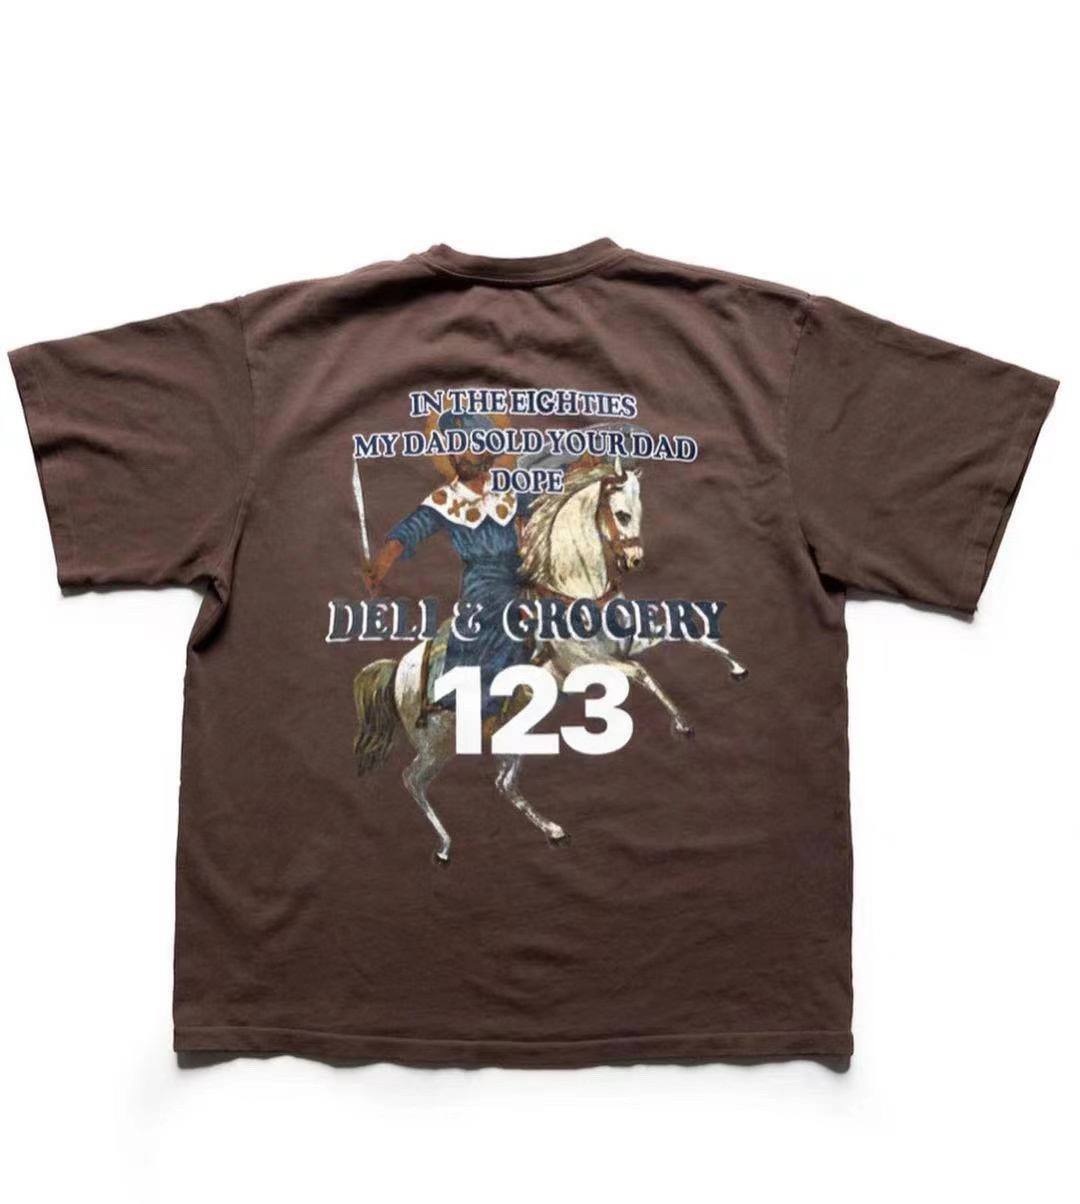 RIVINGTON roi Rebis Dell and Grocery T-Shirt